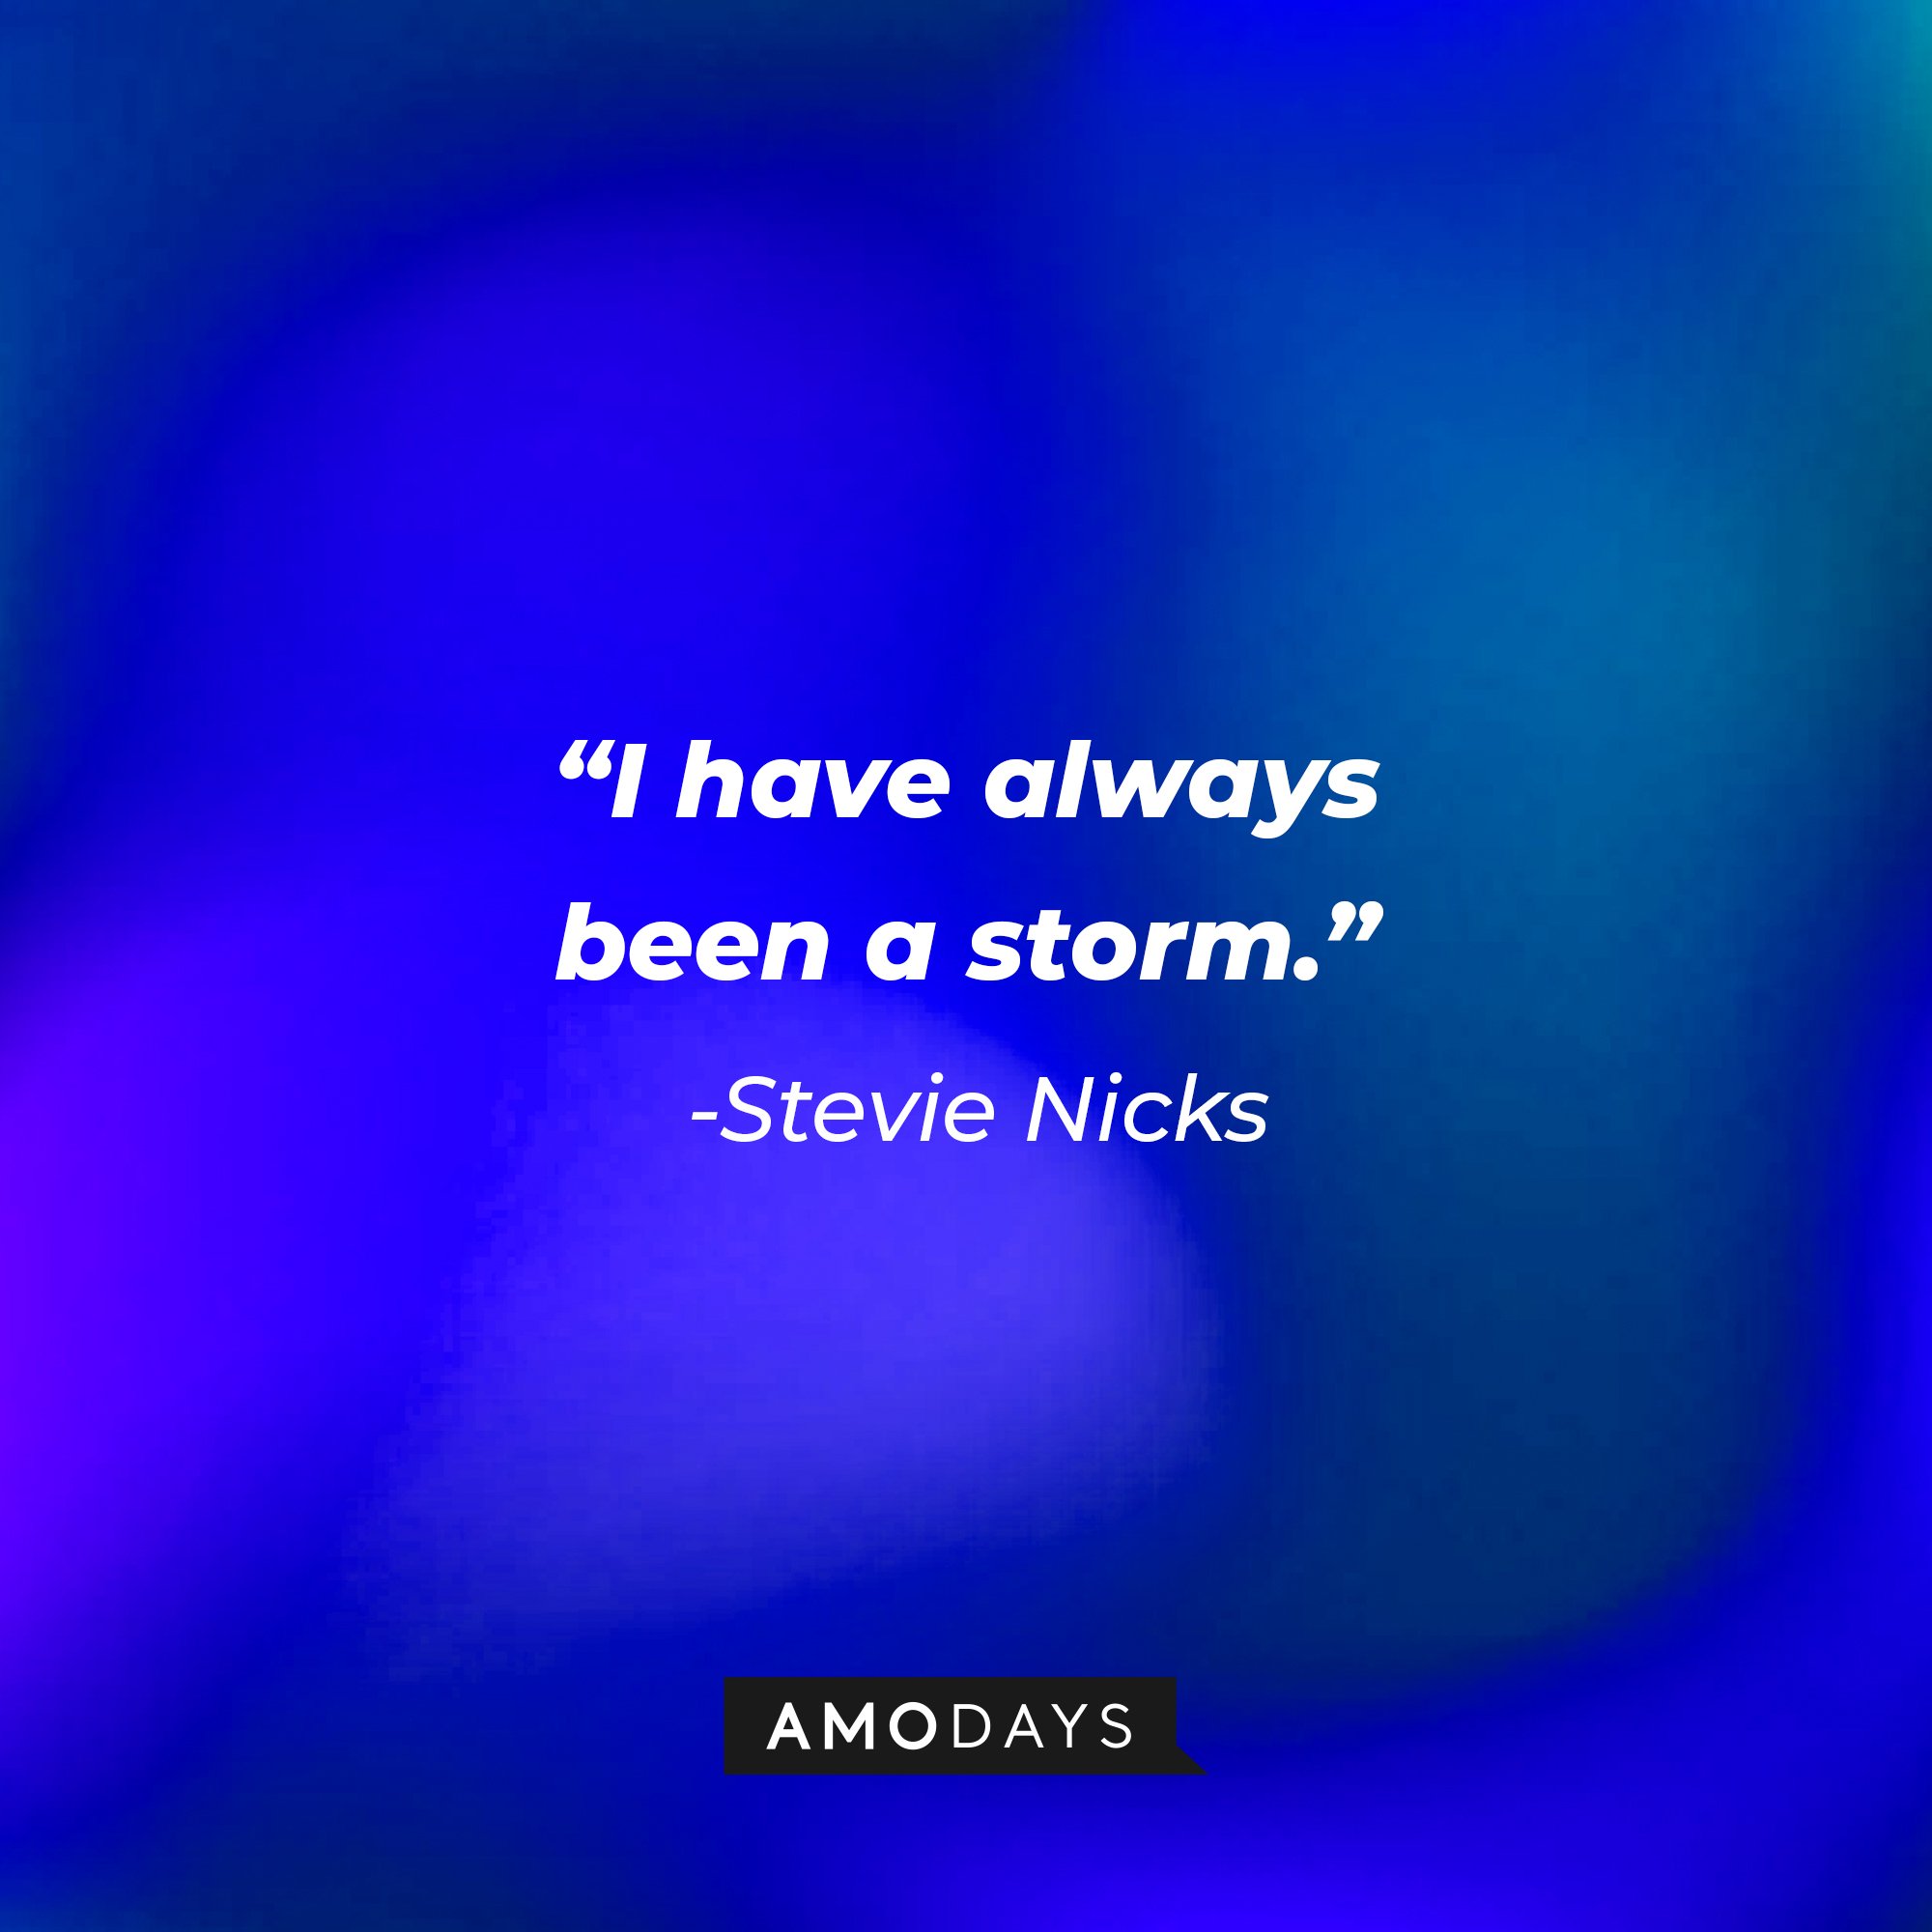 Stevie Nicks's quote: "I have always been a storm." | Image: AmoDays